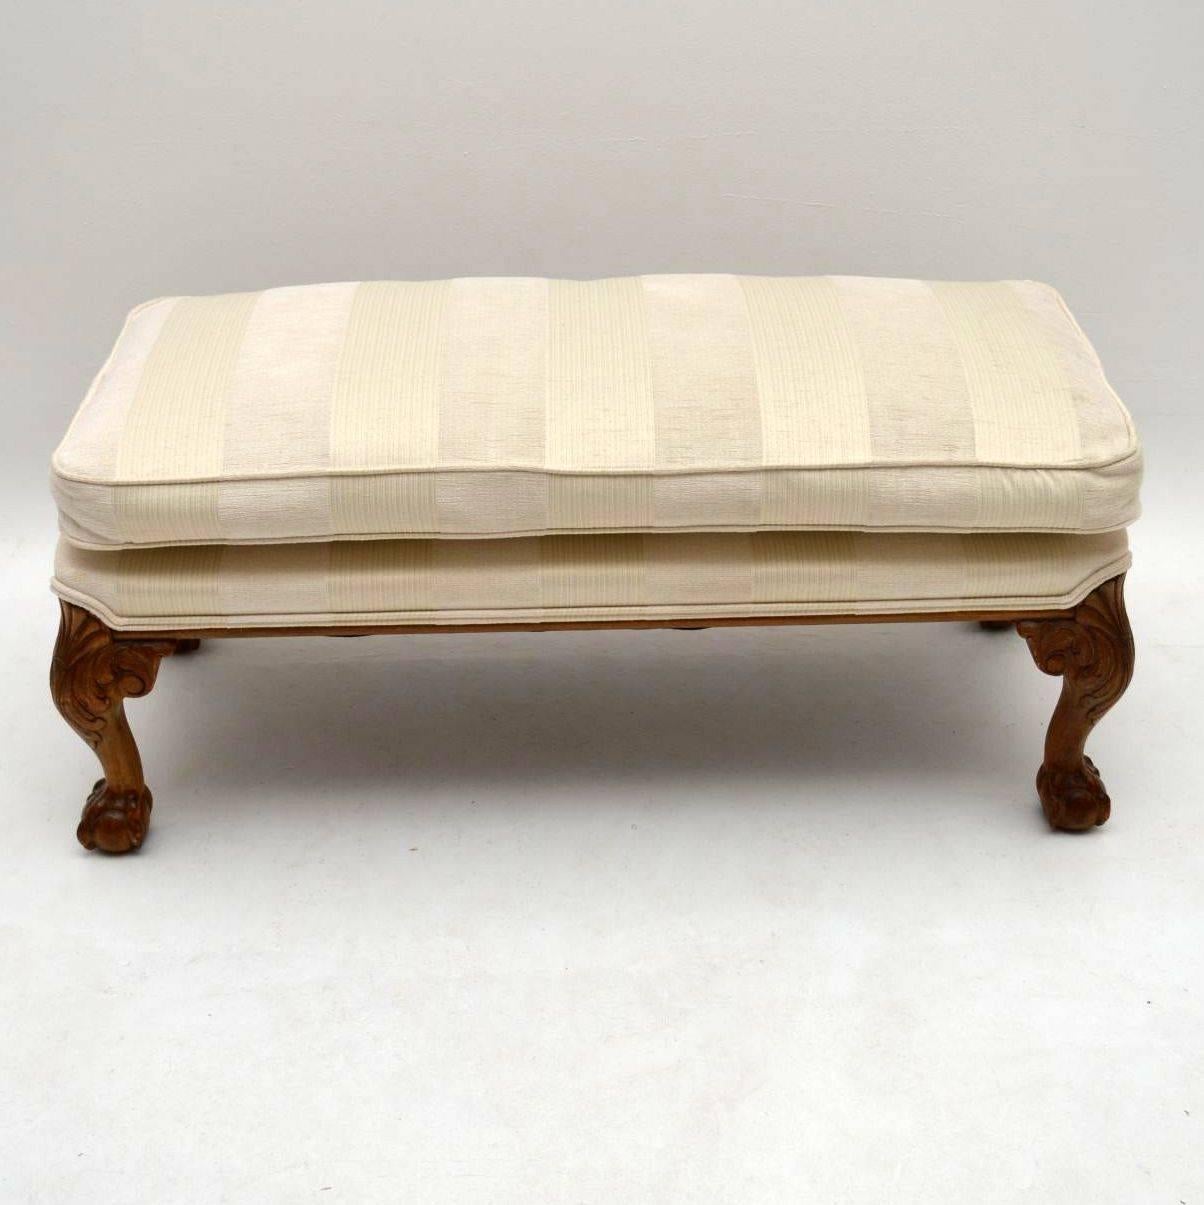 Antique upholstered footstool on hand-carved walnut legs, with shell carvings plus claw and ball feet. This stool has just come out of a private London residence and hasn’t been touched since. The upholstery is excellent condition and was very